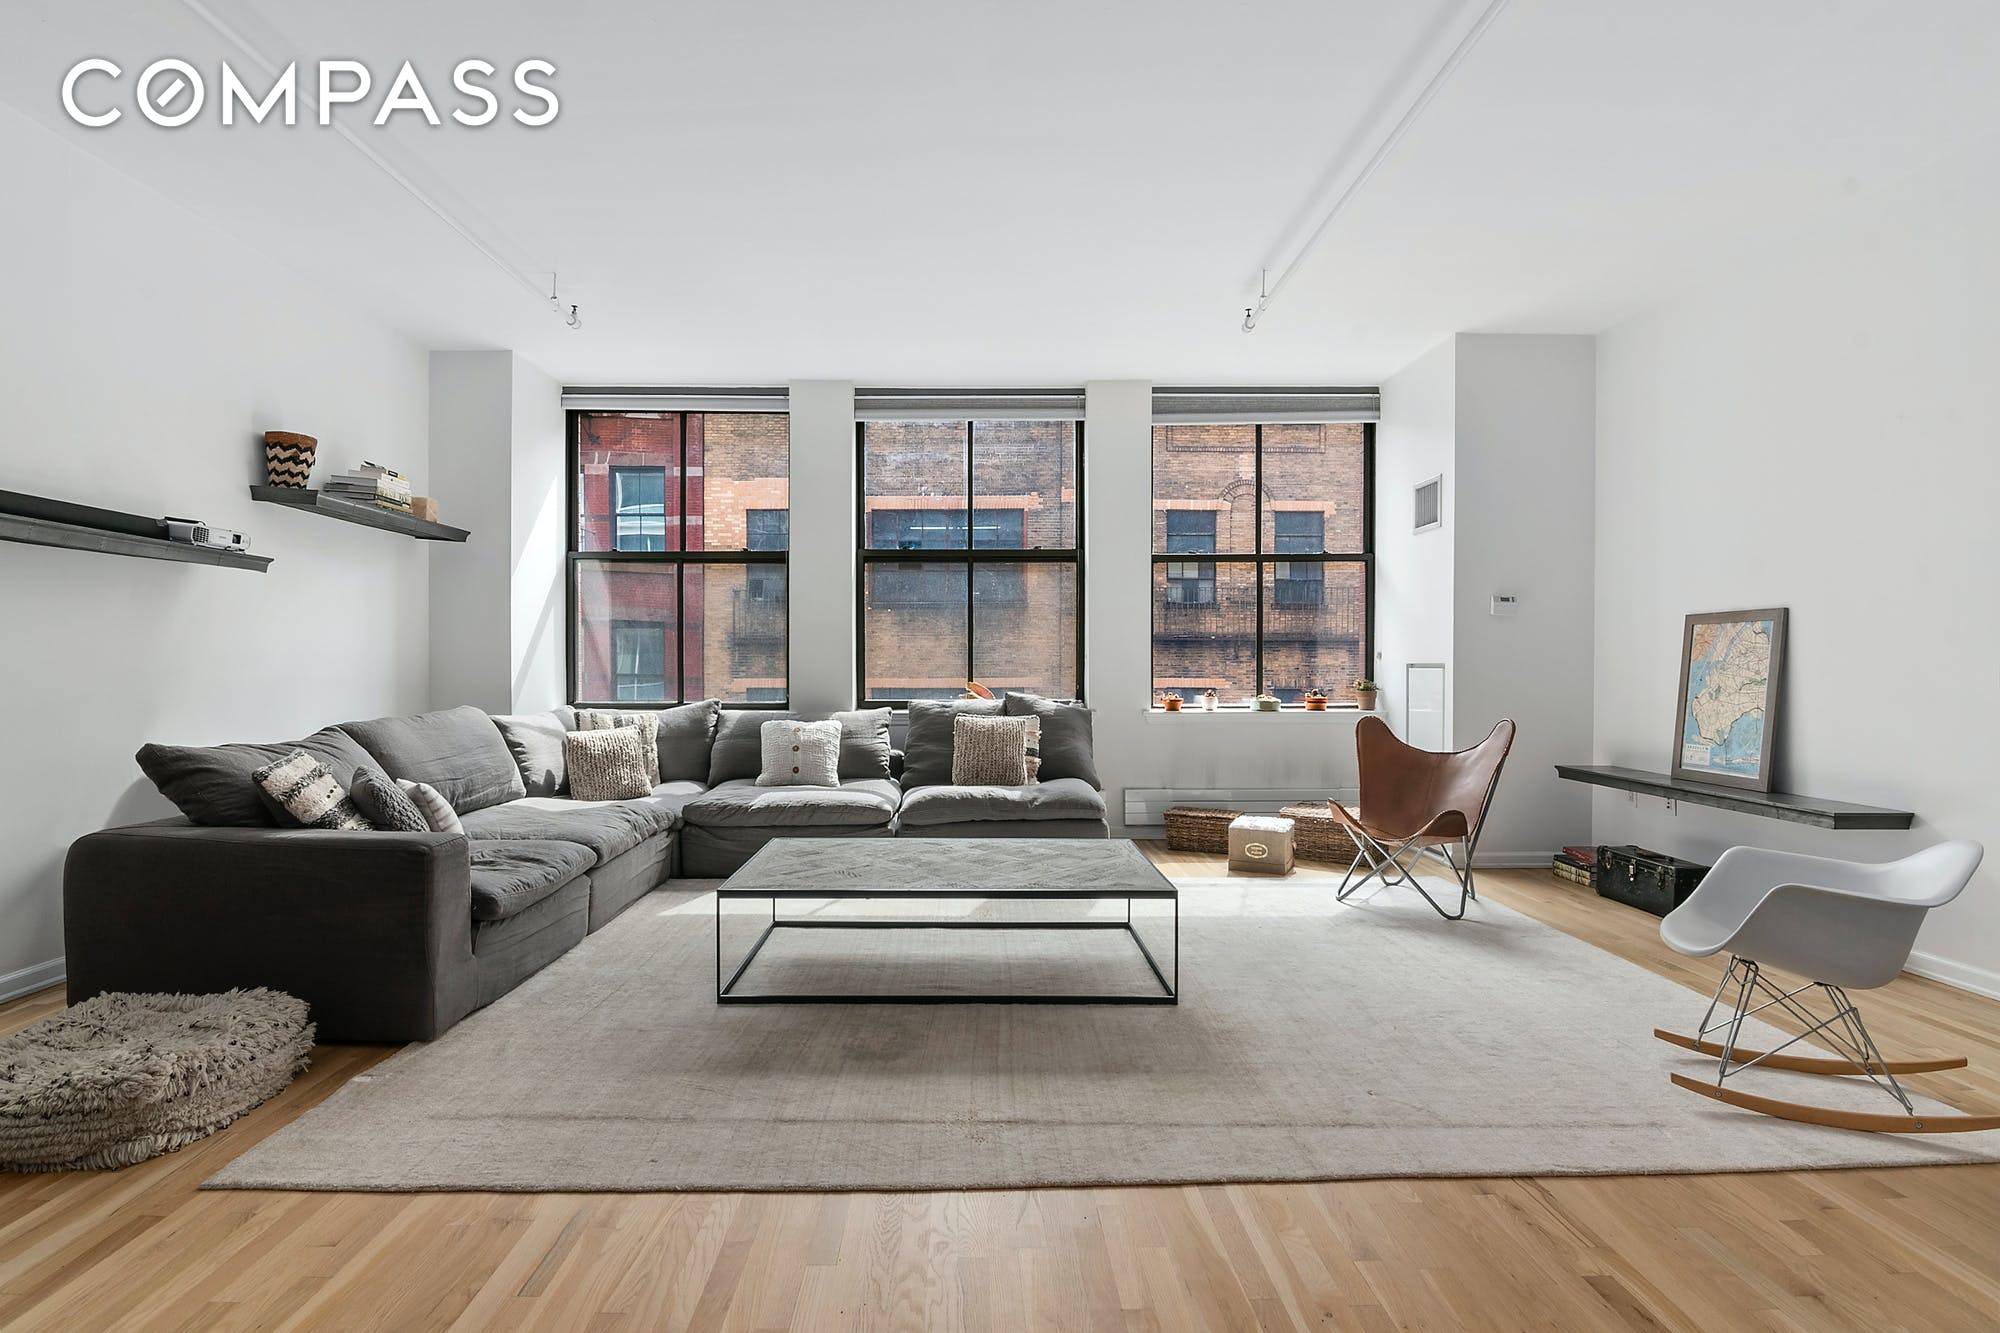 This designer owned luxurious loft is available for rent fully furnished.